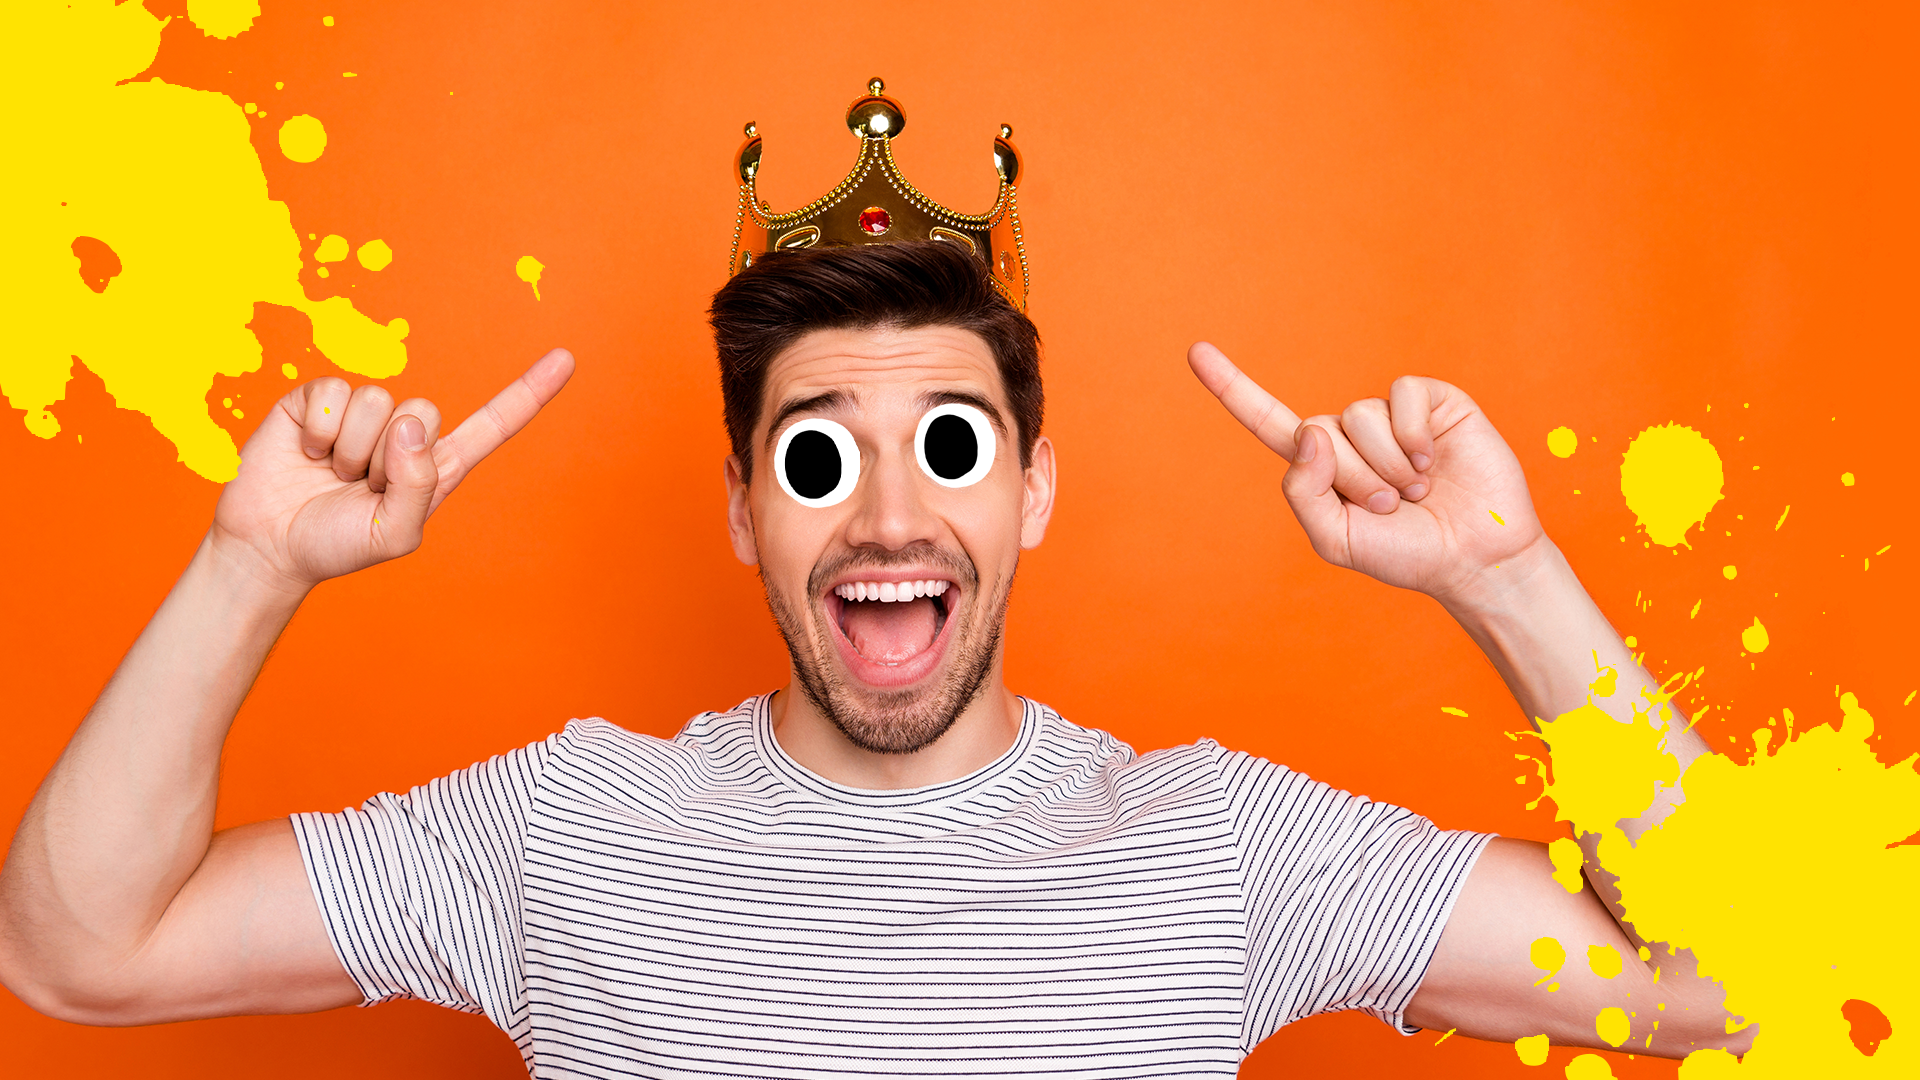 A man delighted to be crowned prom king with splats